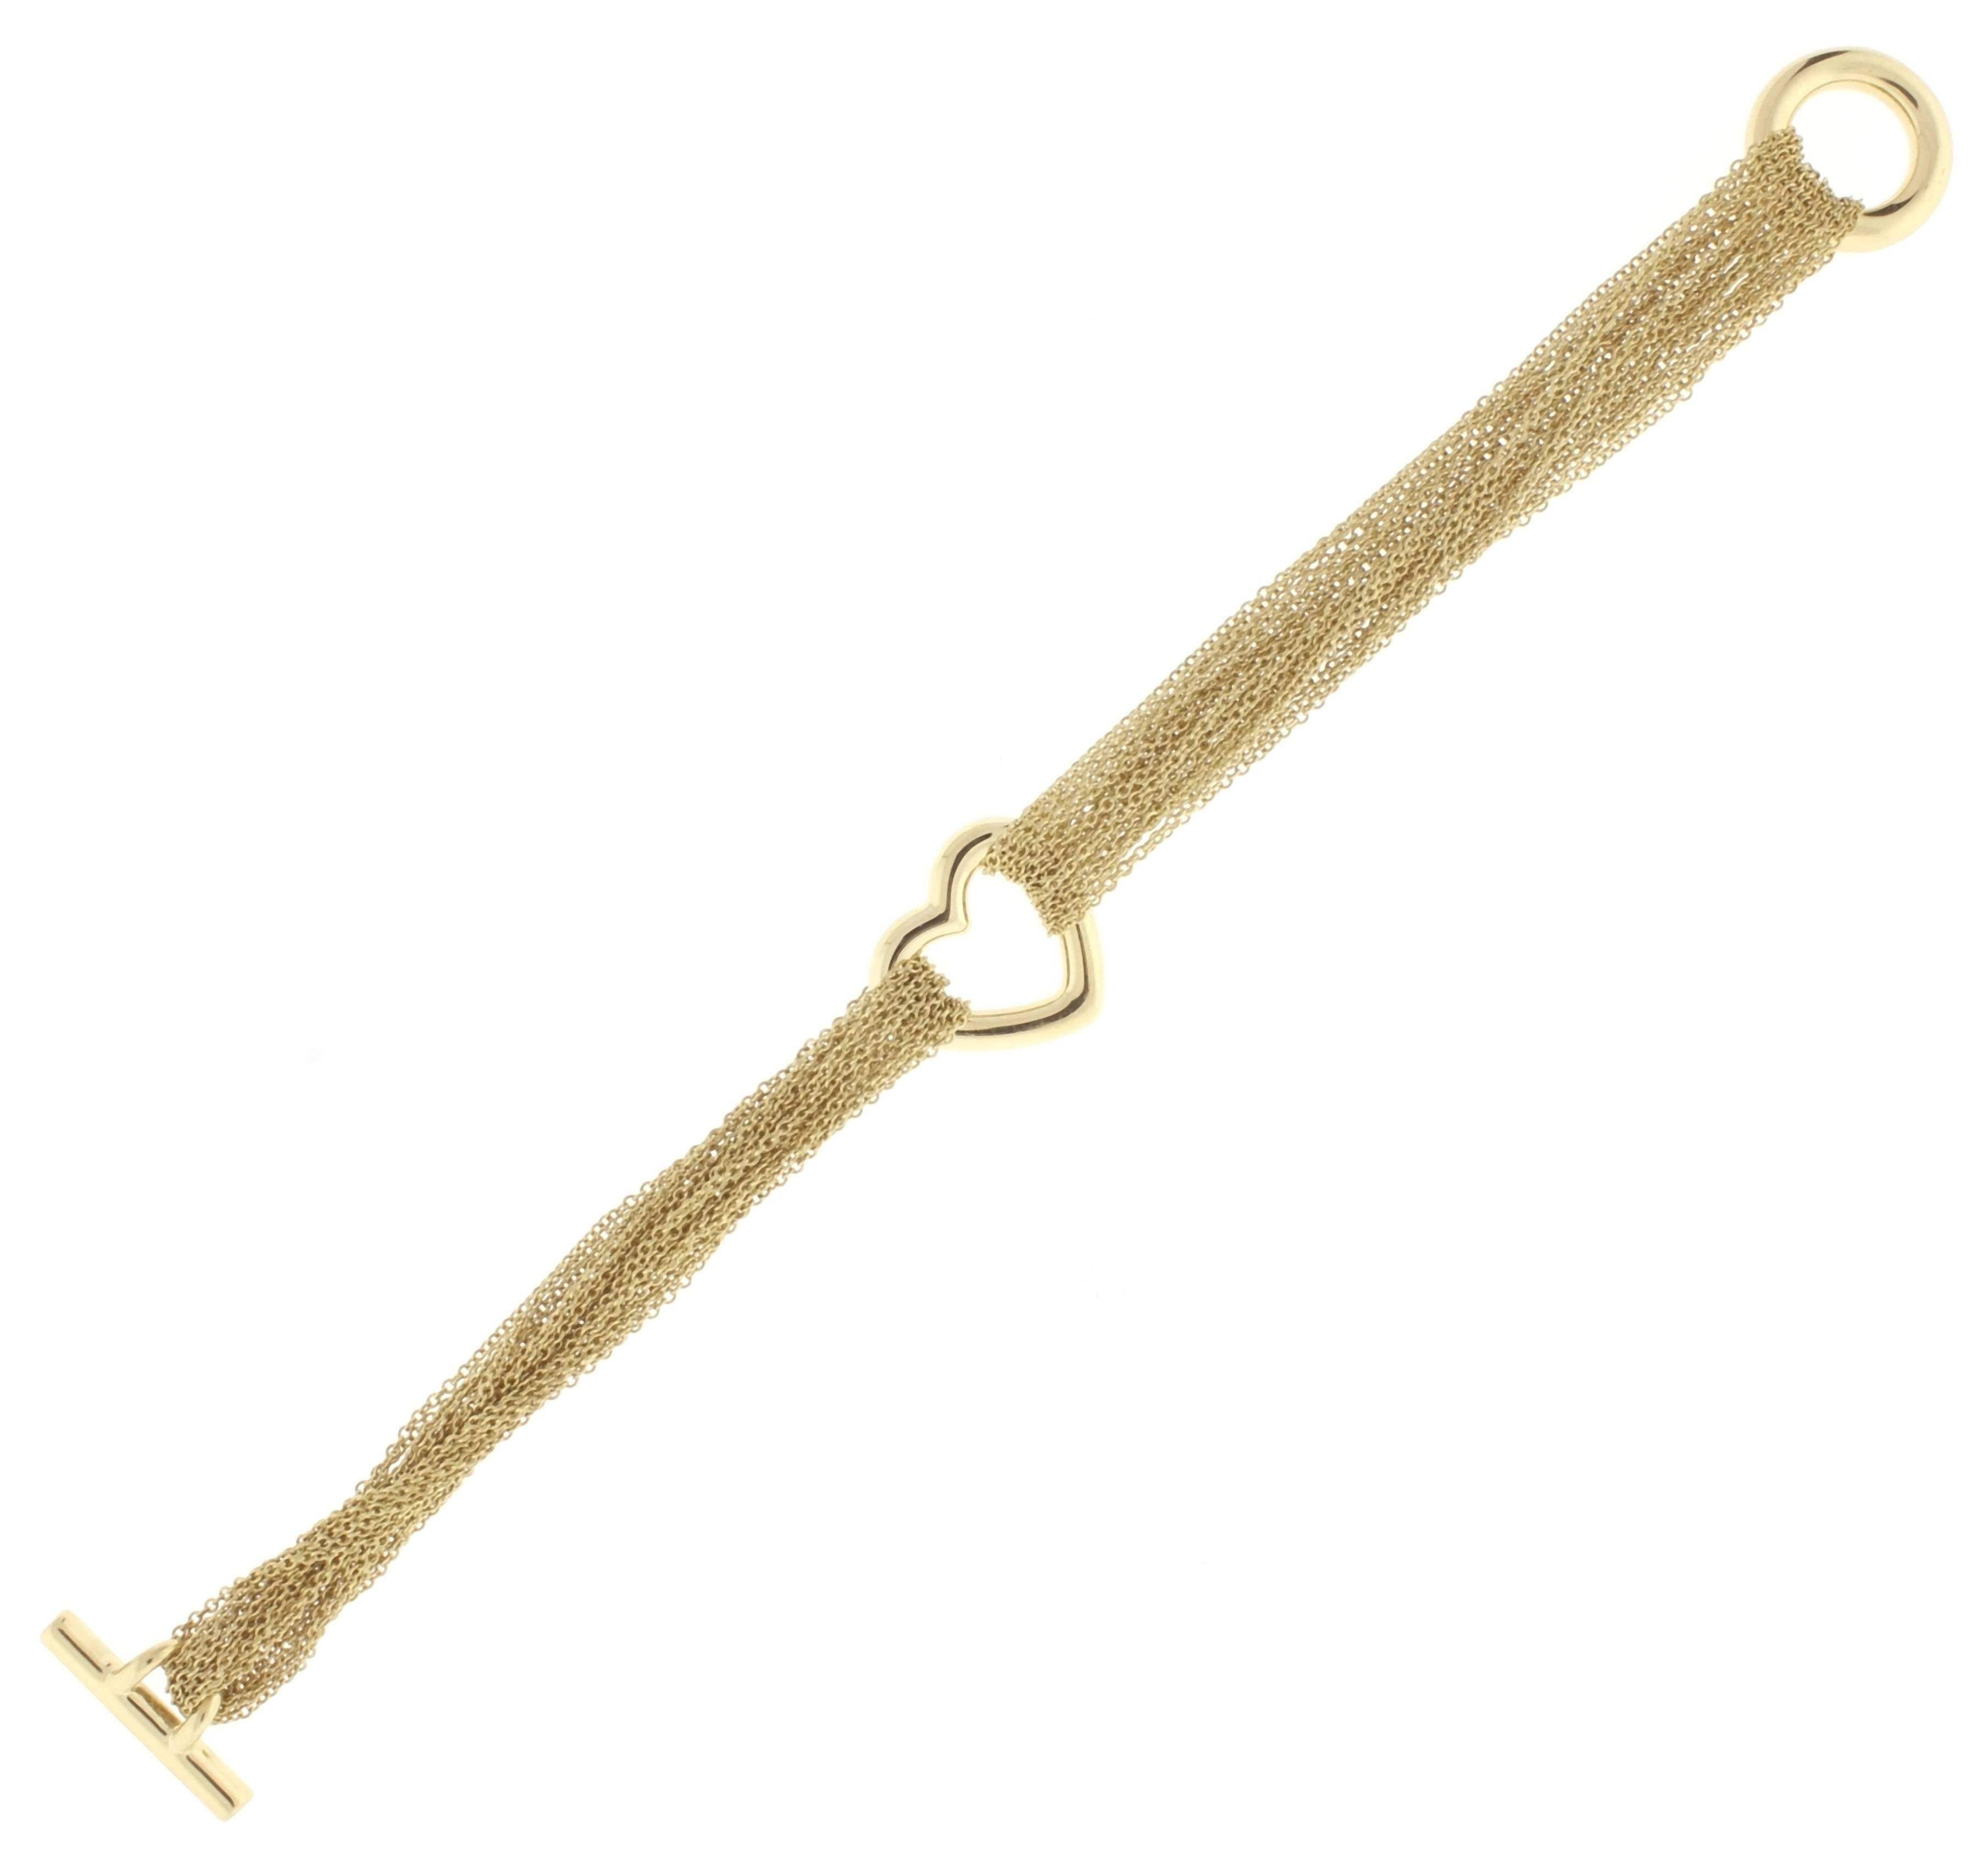 Crafted in18 karat gold from Tiffany and Co. This superb bracelet is comprised of multiple strands of chain with a center open heart and ring and toggle clasp.
6.5 inches 25.5 grams. 